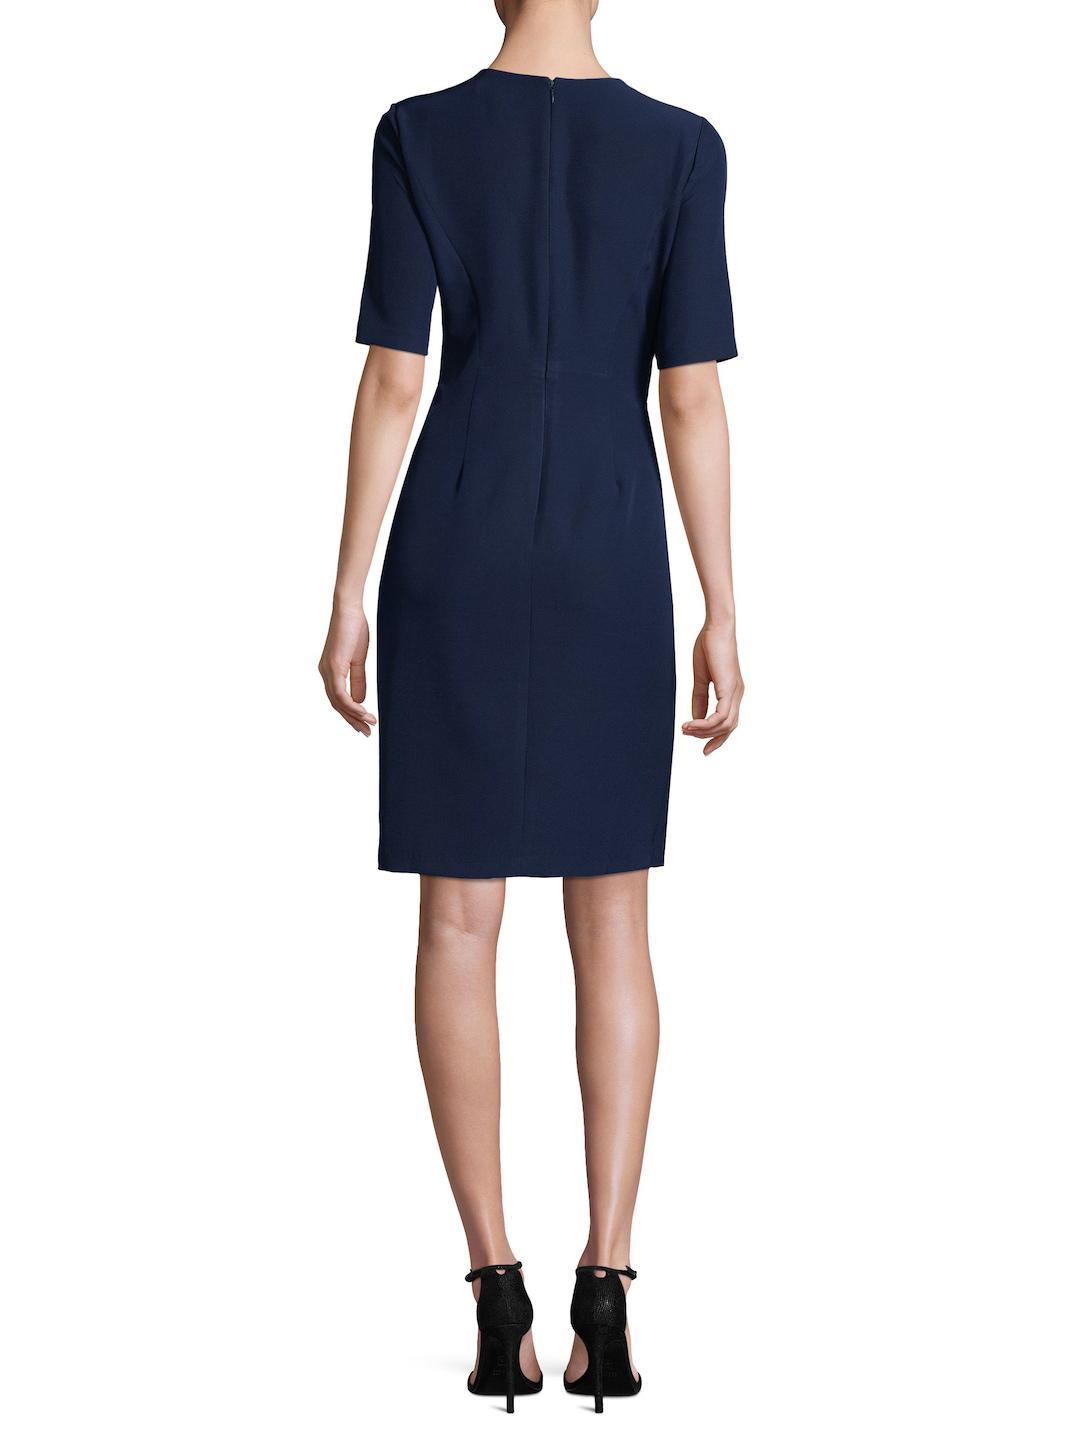 Maggy London Synthetic Crepe Sheath Dress in Dark Navy (Blue) - Lyst